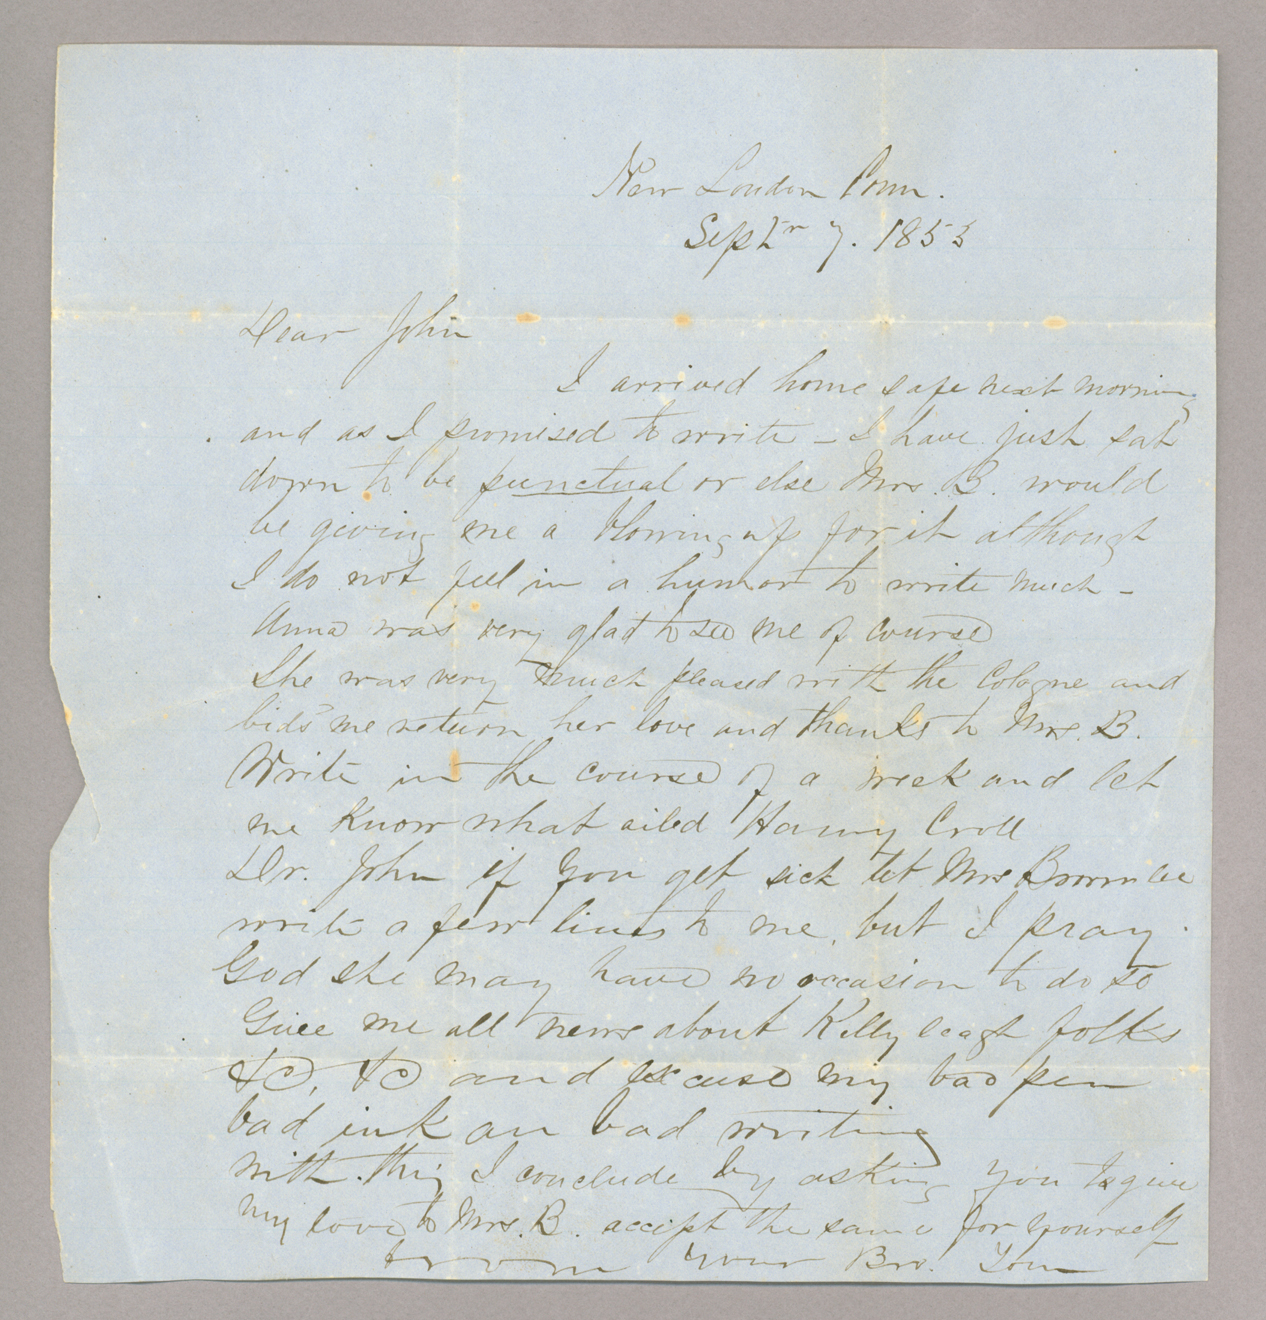 Letter. "Your Bro. Tom" [Thomas Lowry Young], New London, Connecticut, to "Dear John" [John E. Brownlee], n. p., Page 1